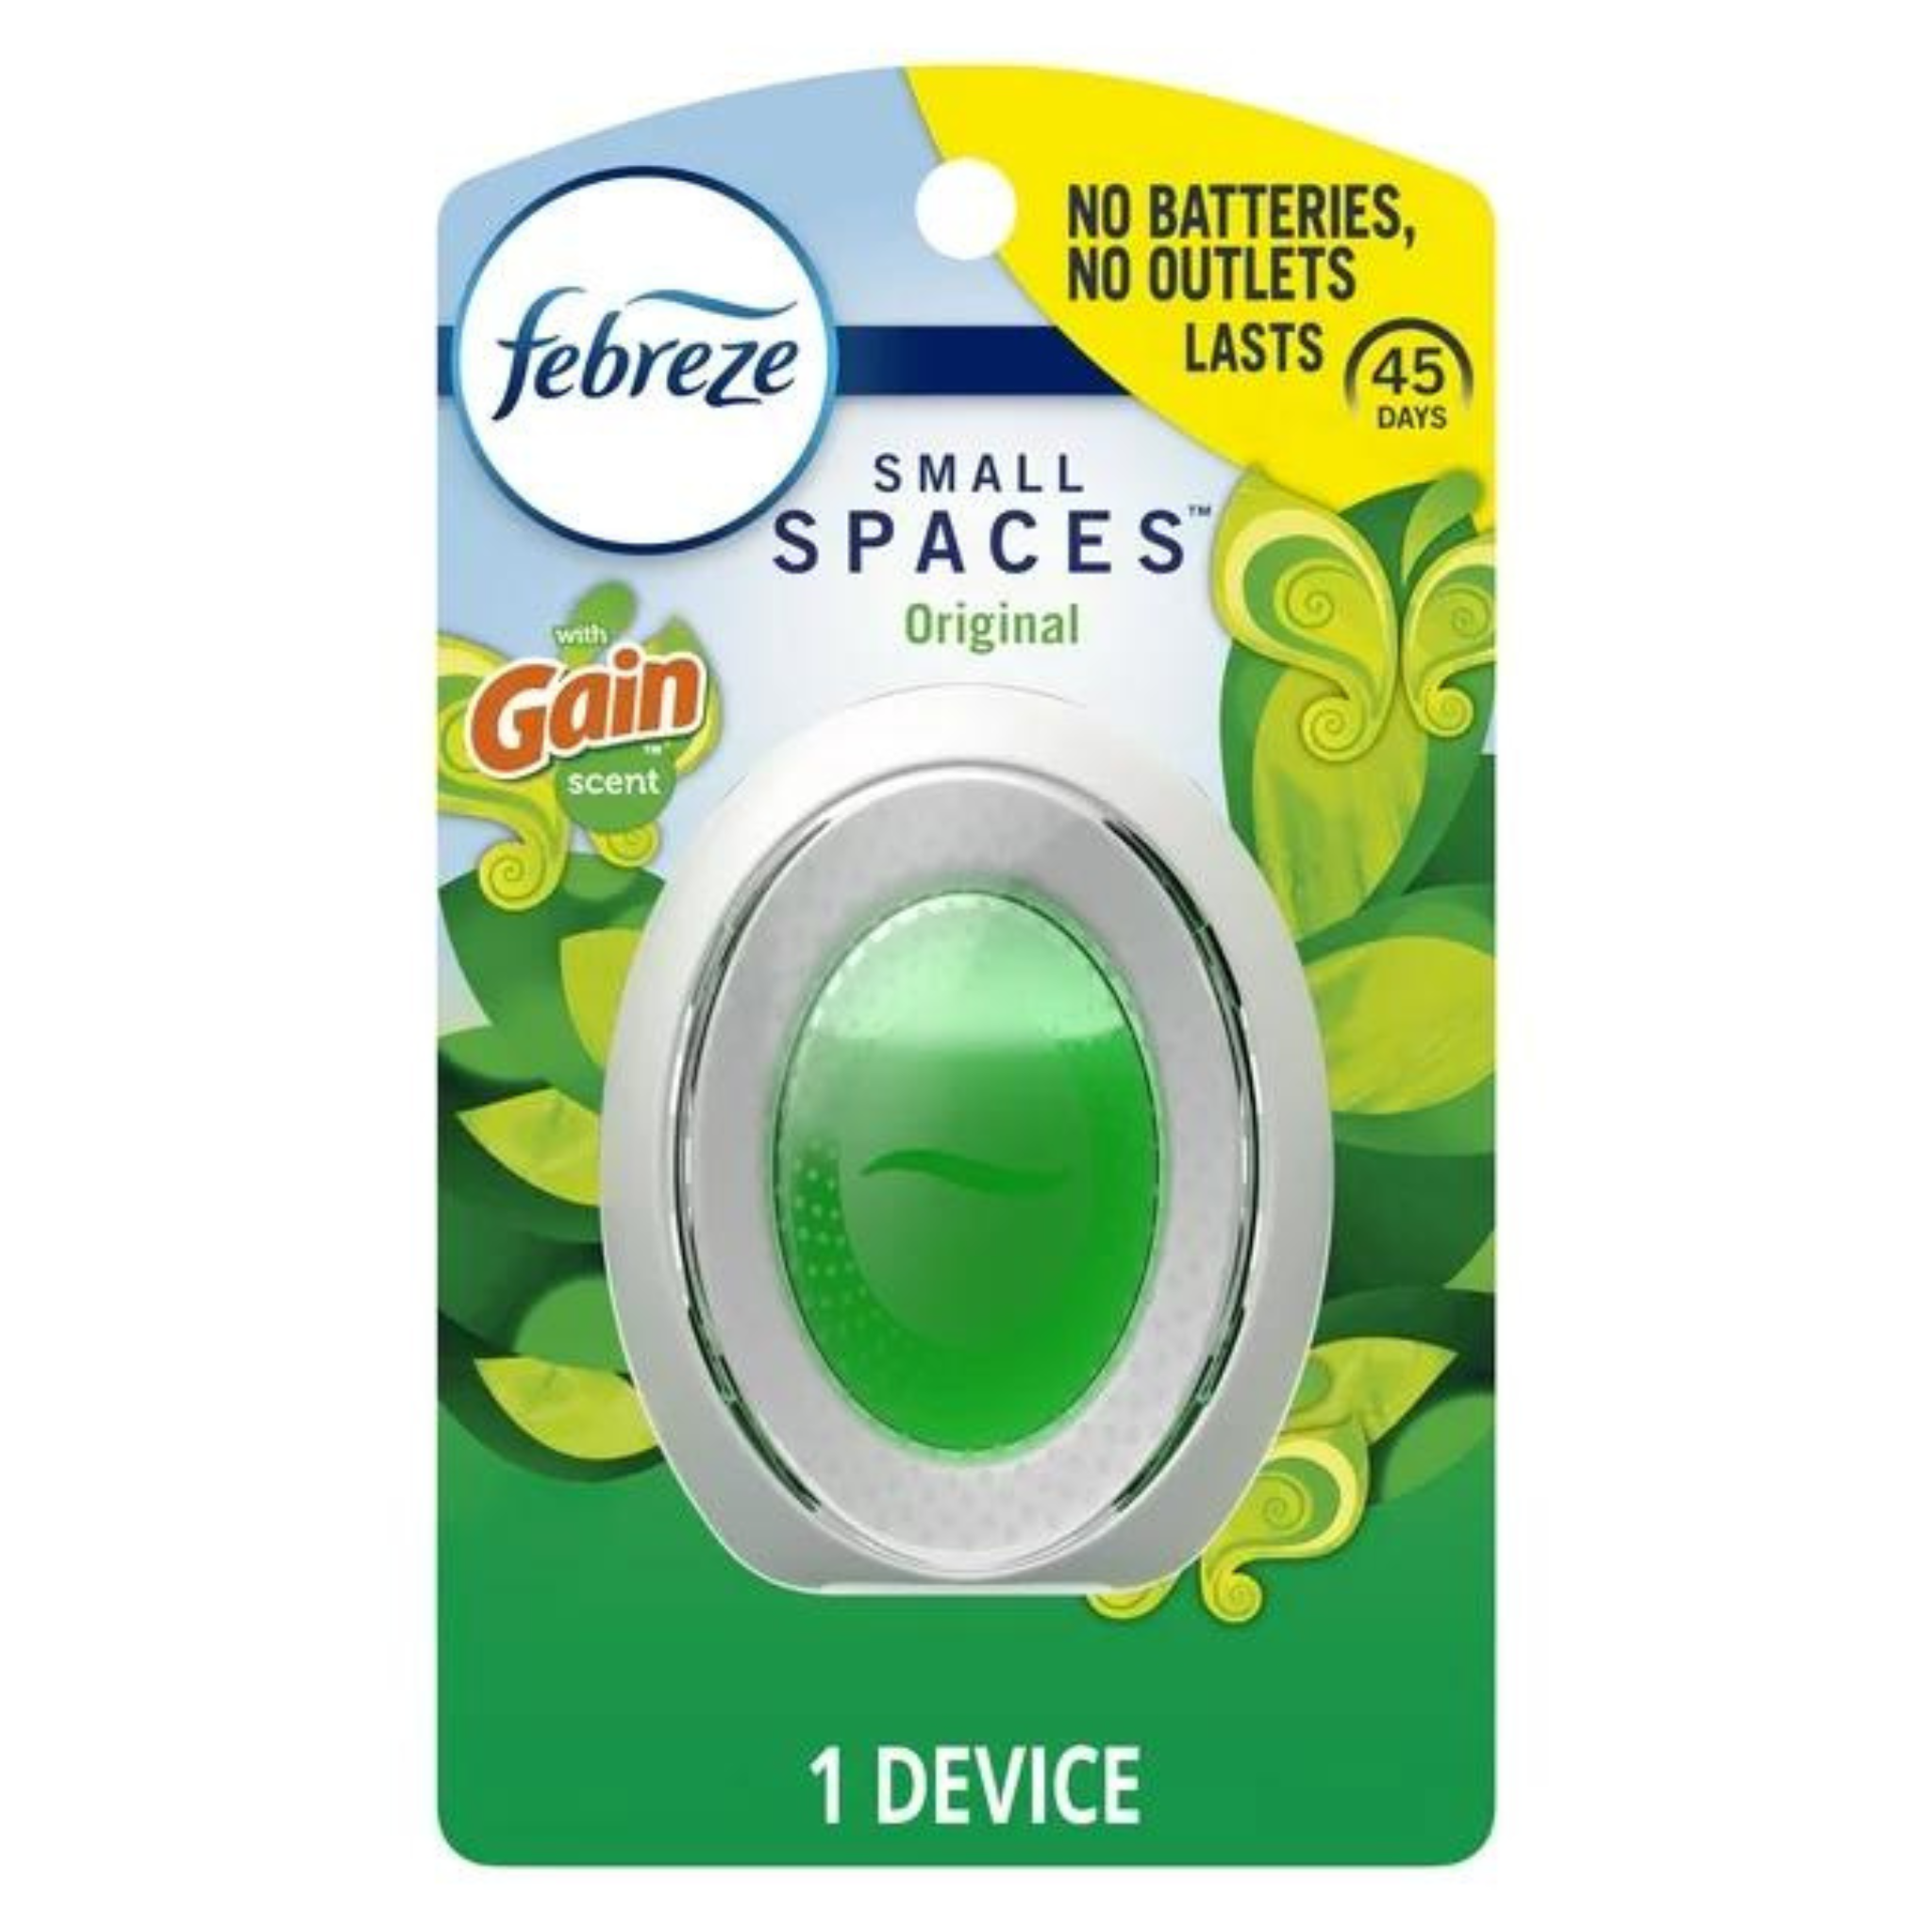 Febreze Small Spaces Air Freshener For $3.24 + Get $2.30 in Walmart Cash